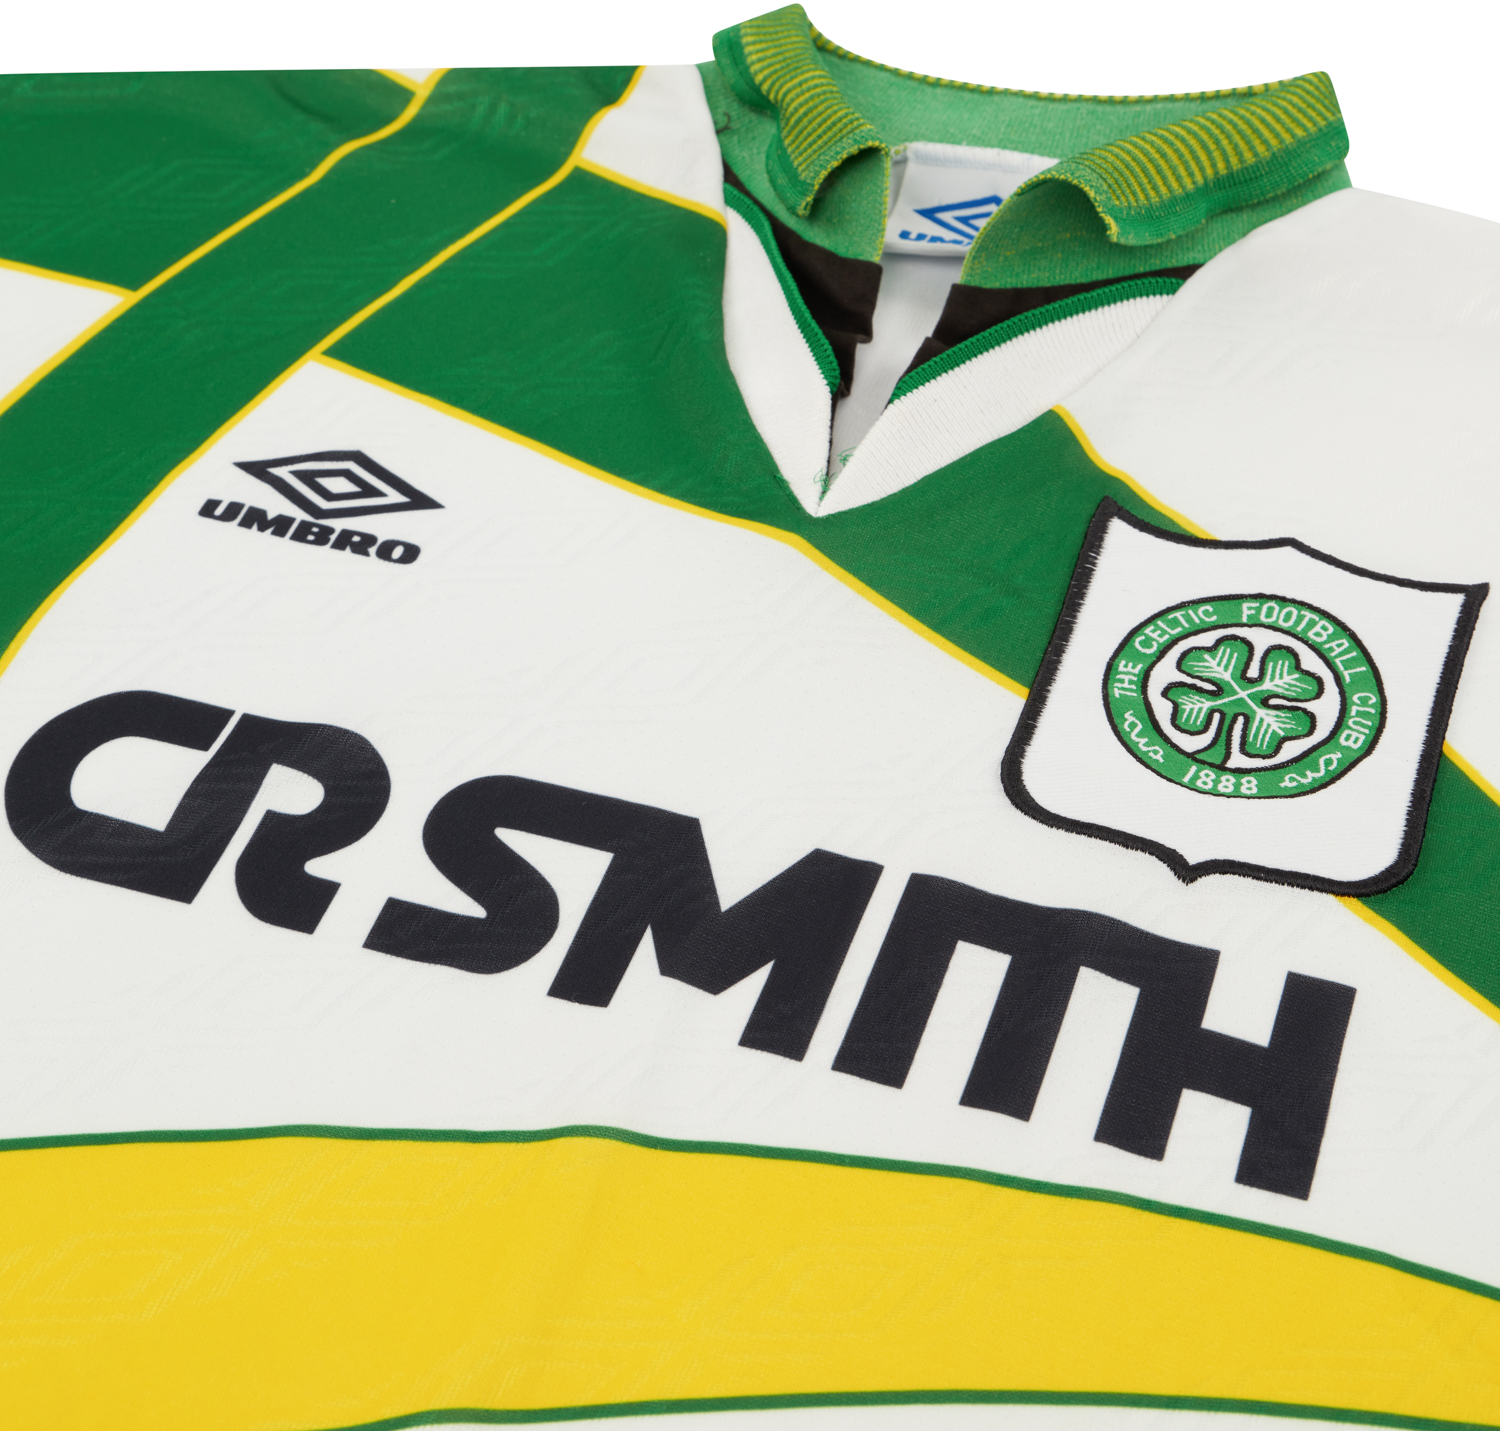 Classic Football Shirts - Celtic 1994/95 Third by Umbro A glorious design  from Umbro in the mid nineties! 🏴󠁧󠁢󠁳󠁣󠁴󠁿